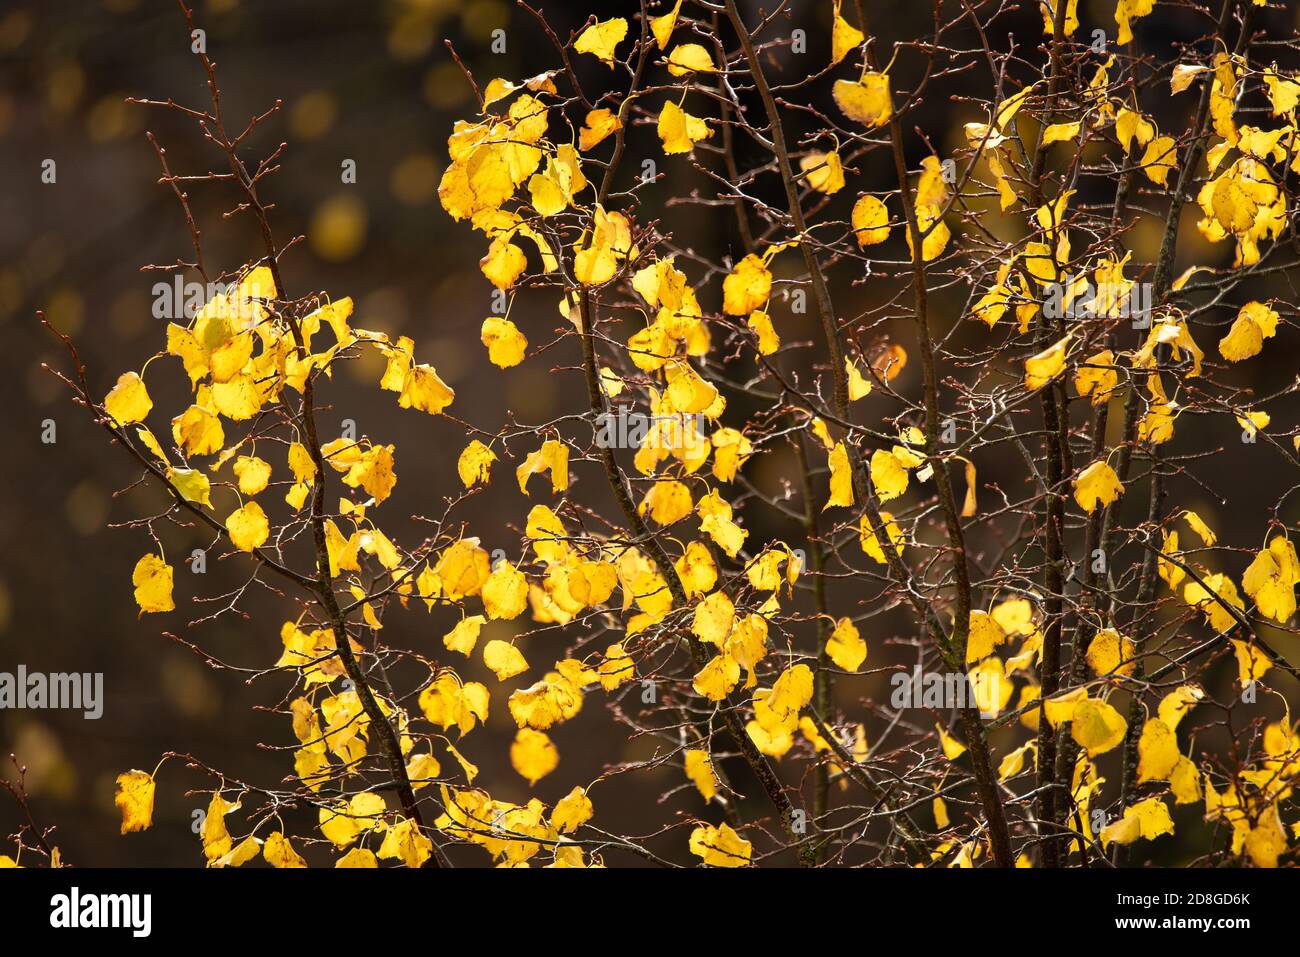 Bright yellow autumn leaves on a tree Stock Photo